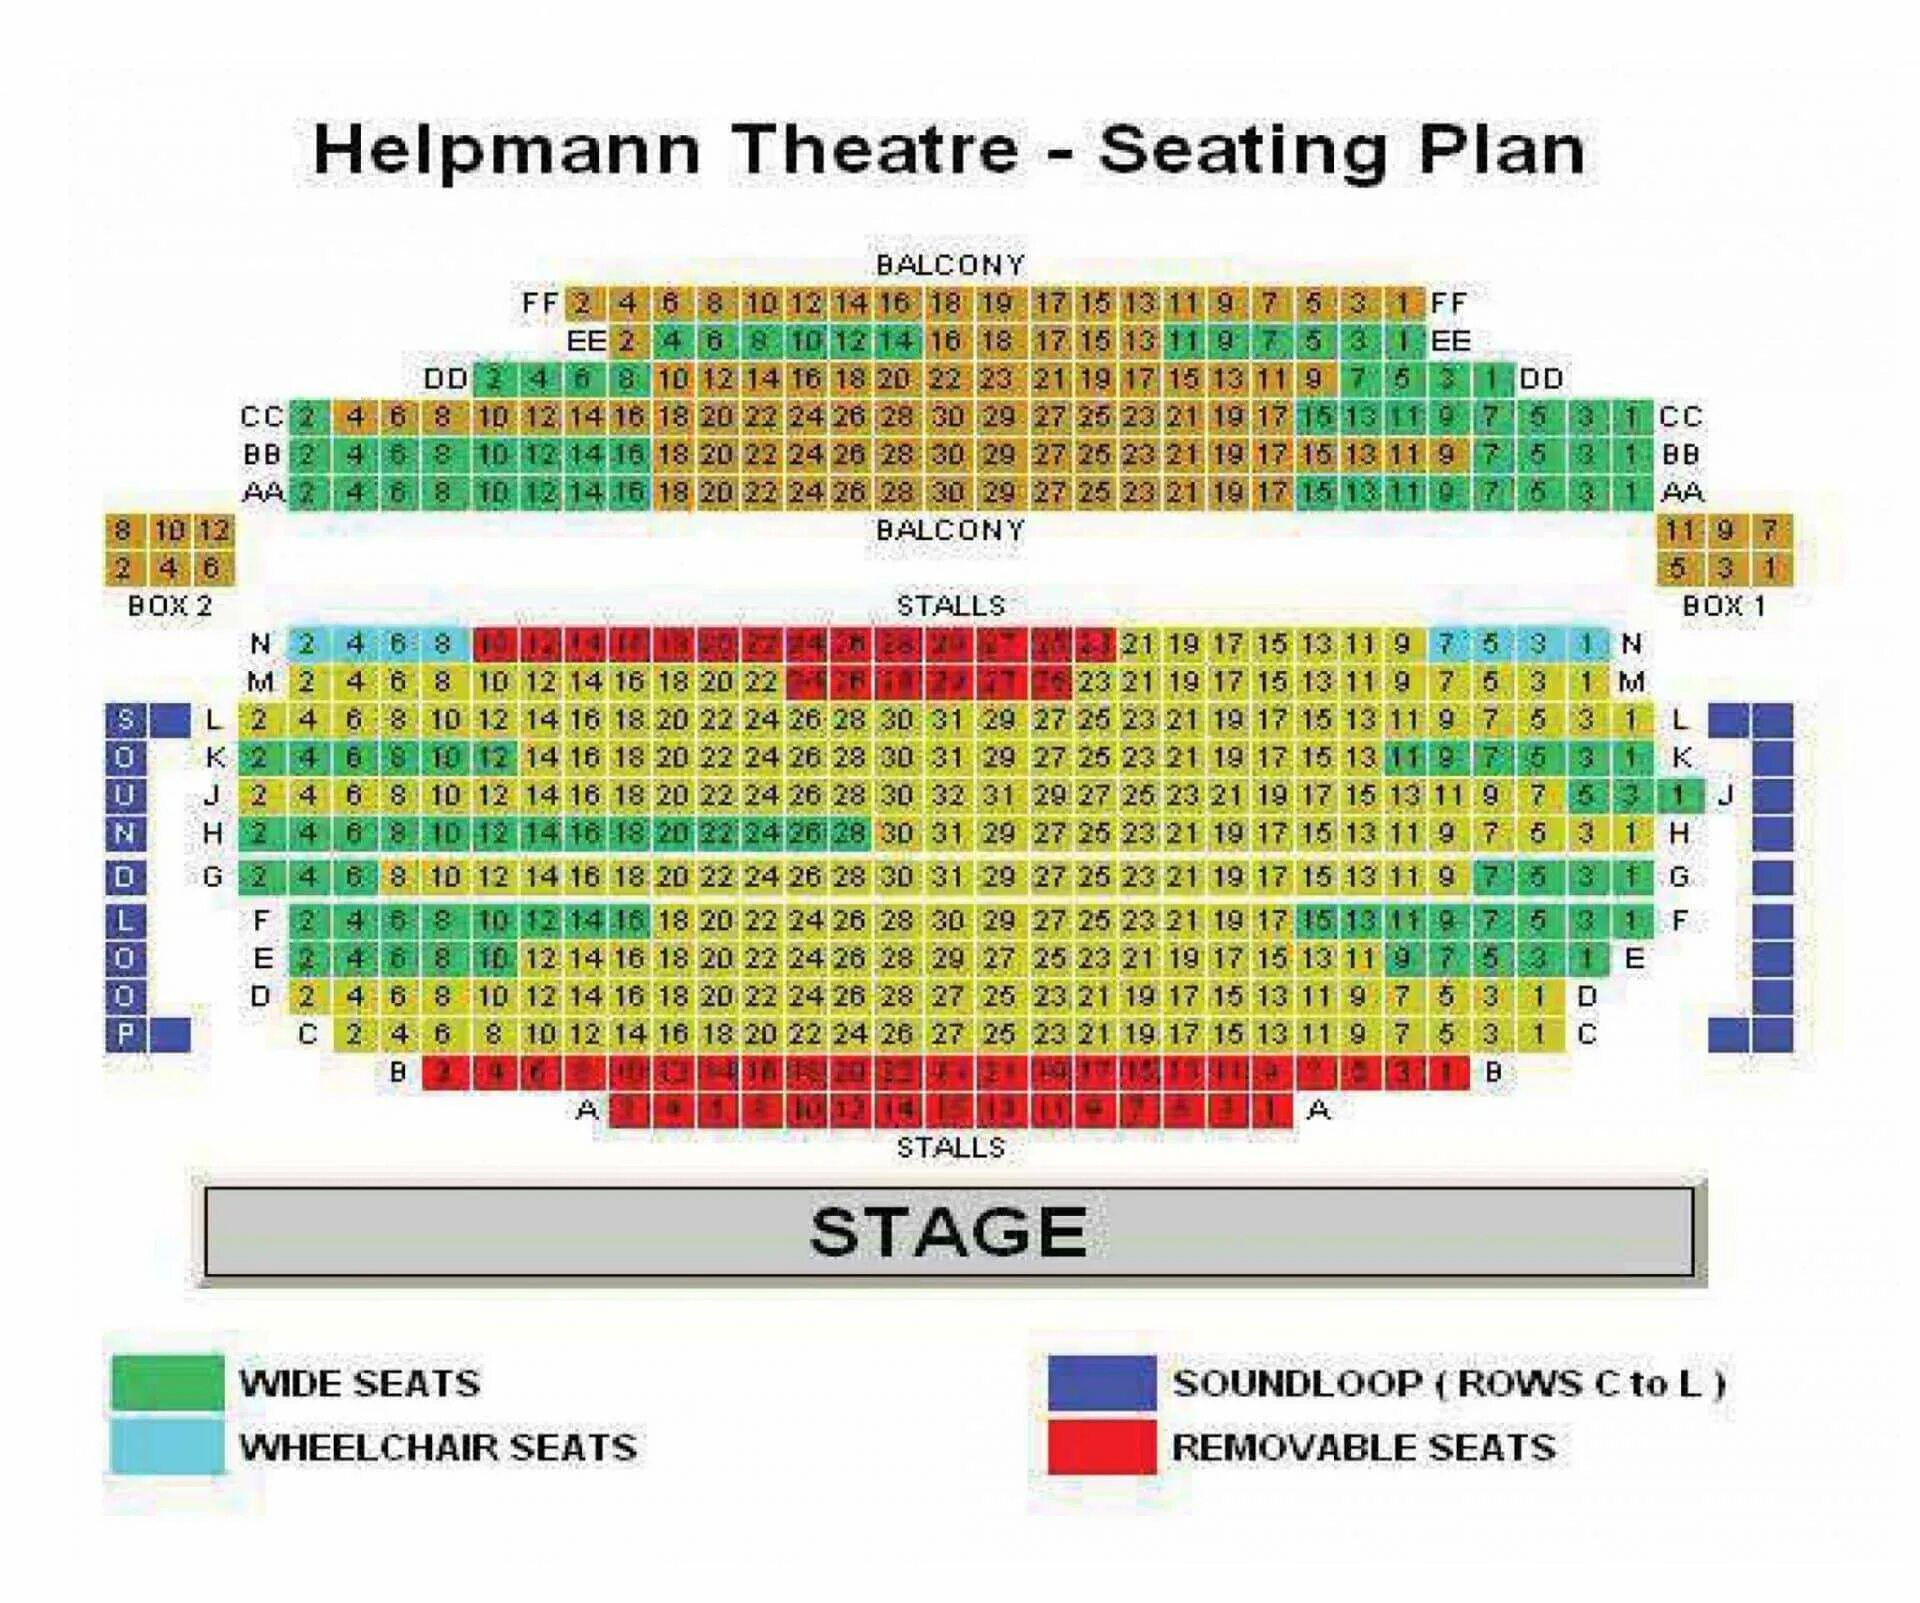 Theatre seats. Theatre Seating Plan. Seats in the Theatre. Scheme of Seats in Theatre. Theatre Seats in English.